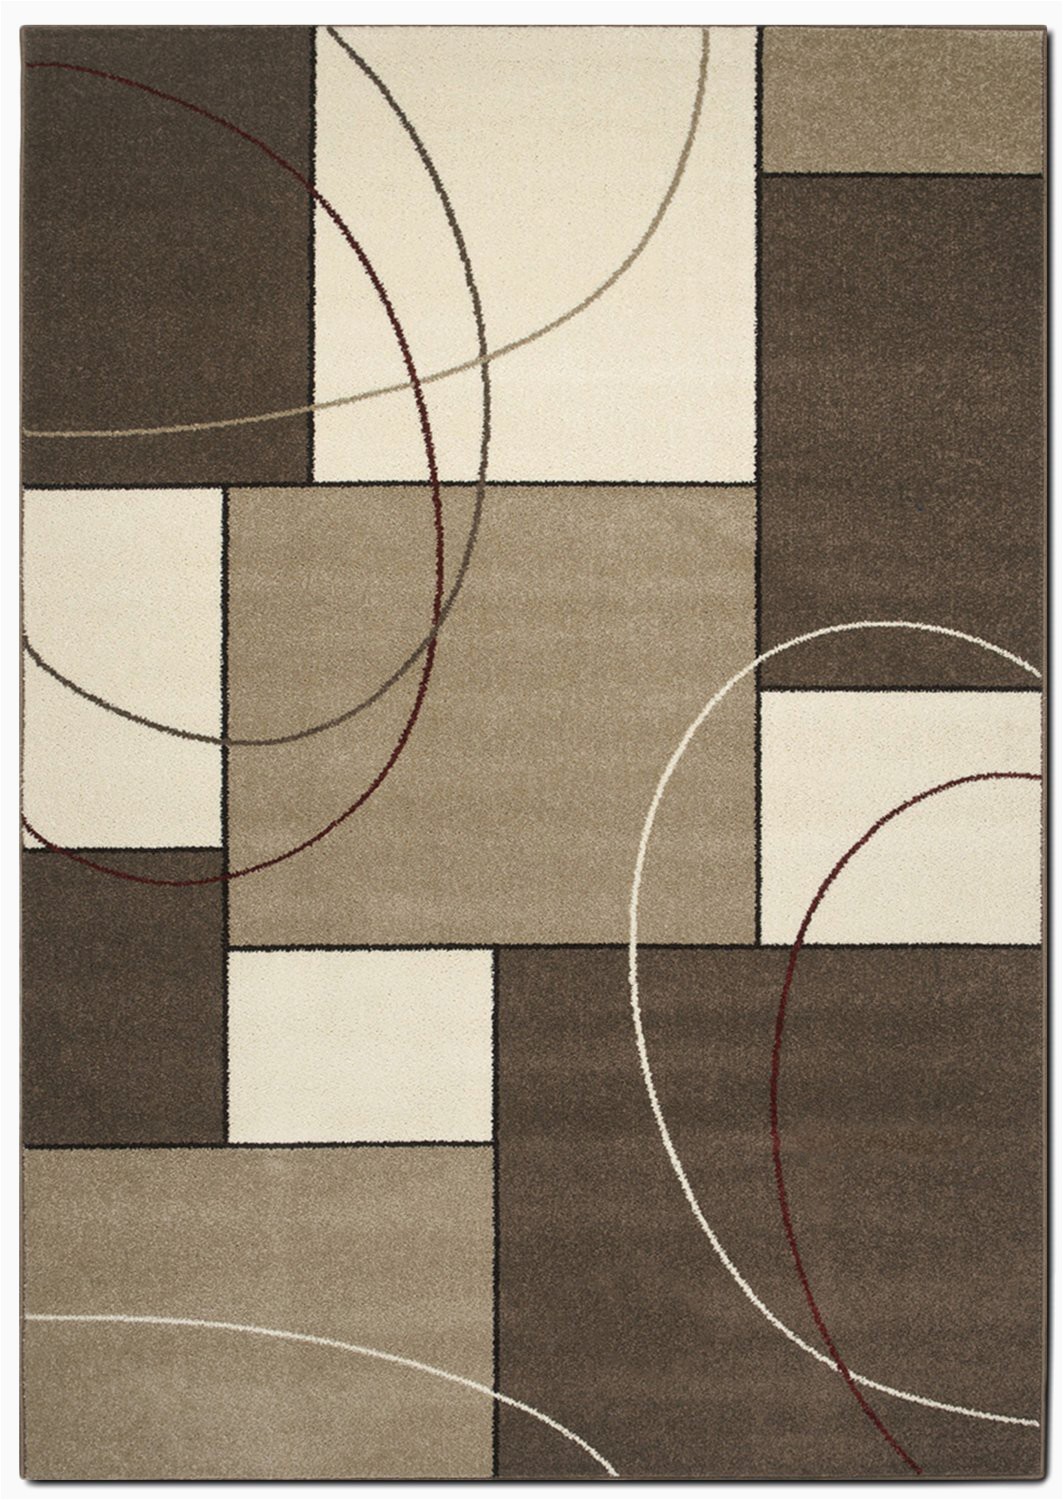 11 by 11 area Rug Casa Abstract 8 X 11 area Rug Cream and Taupe